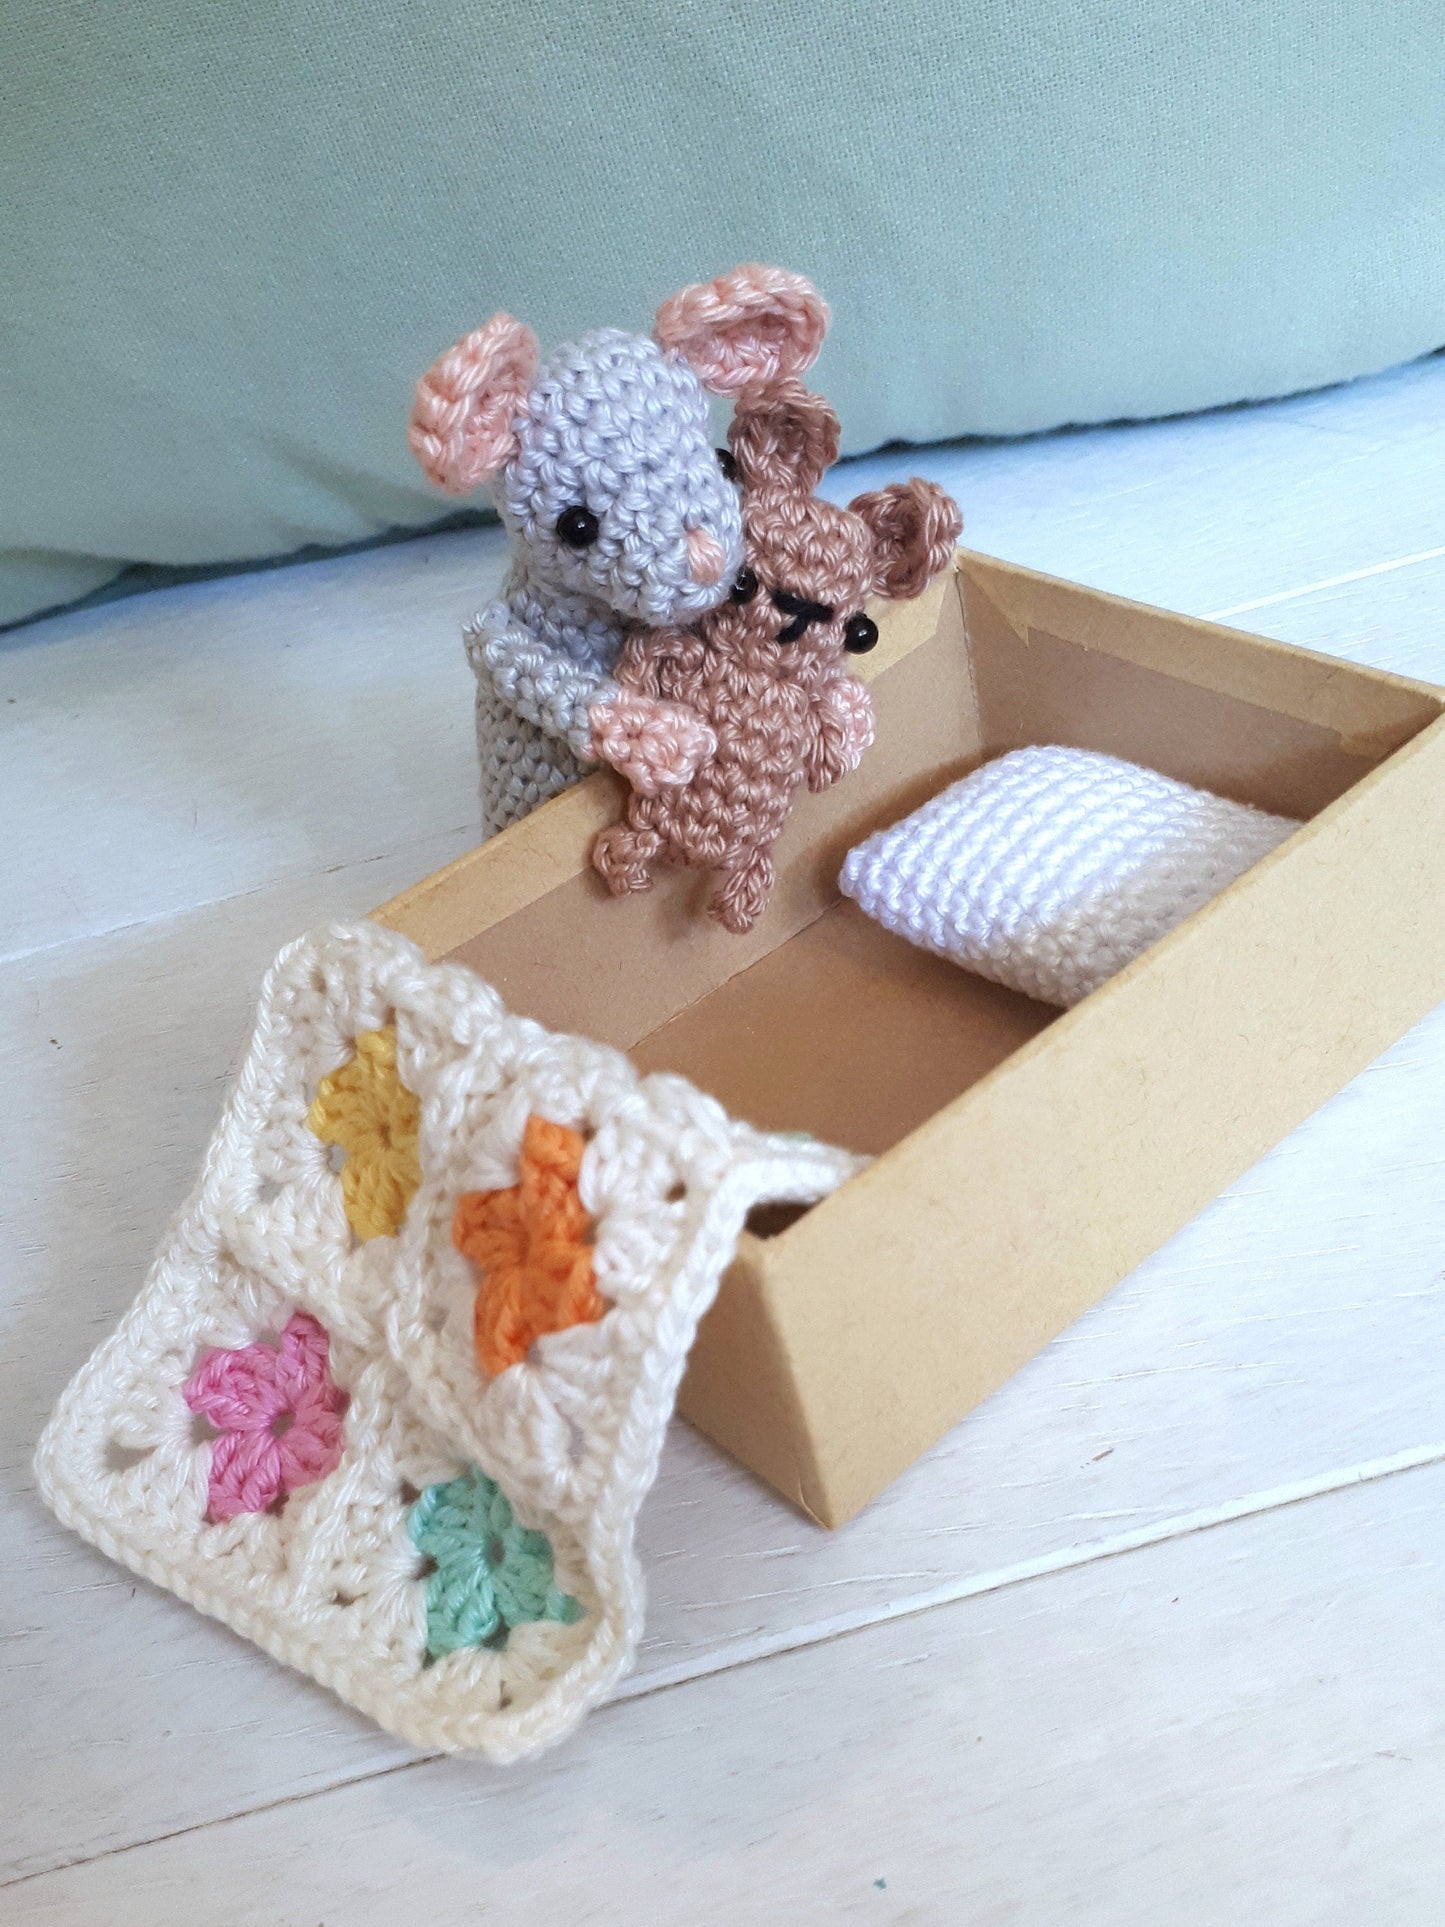 Mouse in a box travel toy